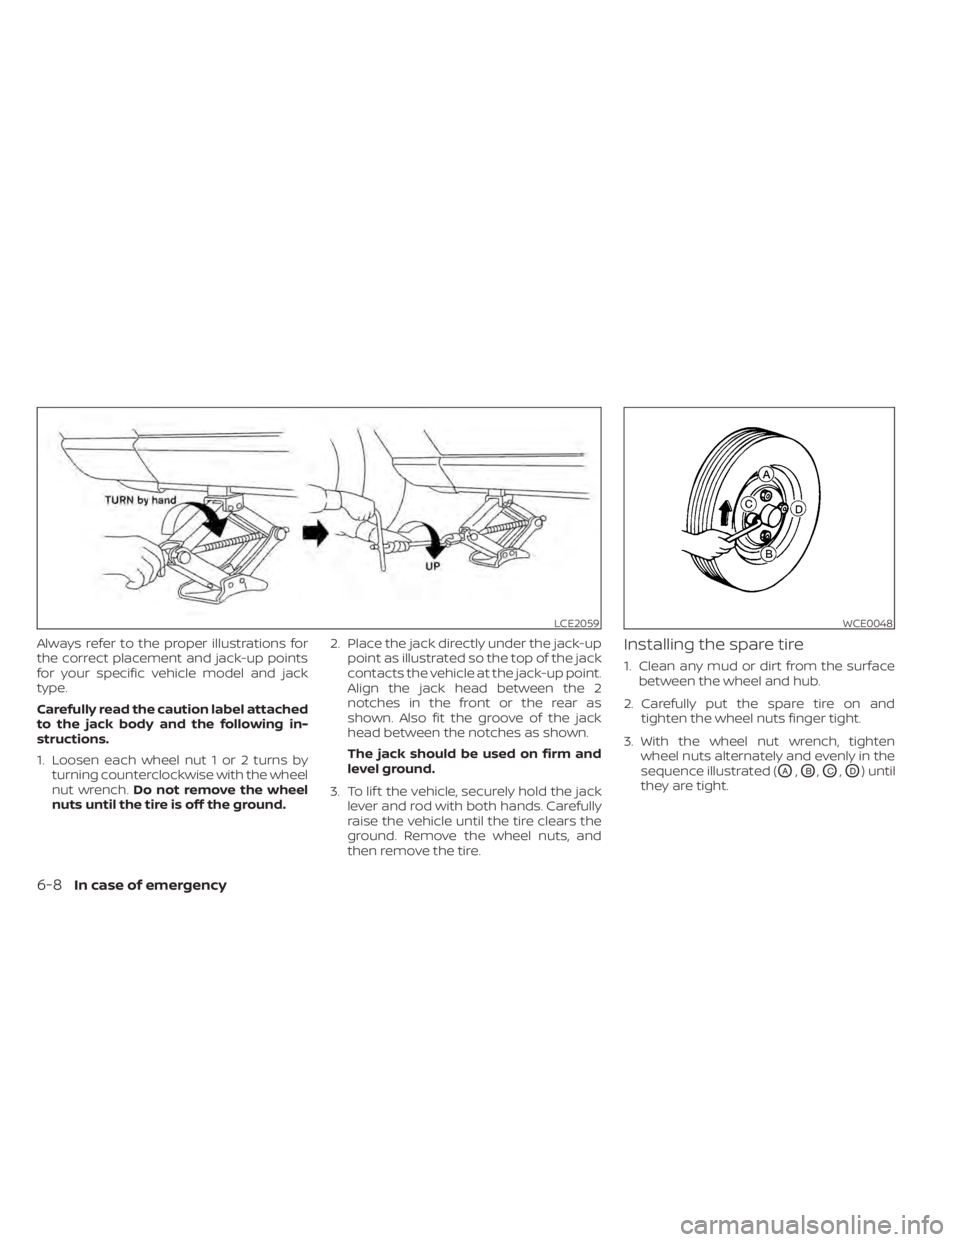 NISSAN KICKS 2022  Owners Manual Always refer to the proper illustrations for
the correct placement and jack-up points
for your specific vehicle model and jack
type.
Carefully read the caution label attached
to the jack body and the 